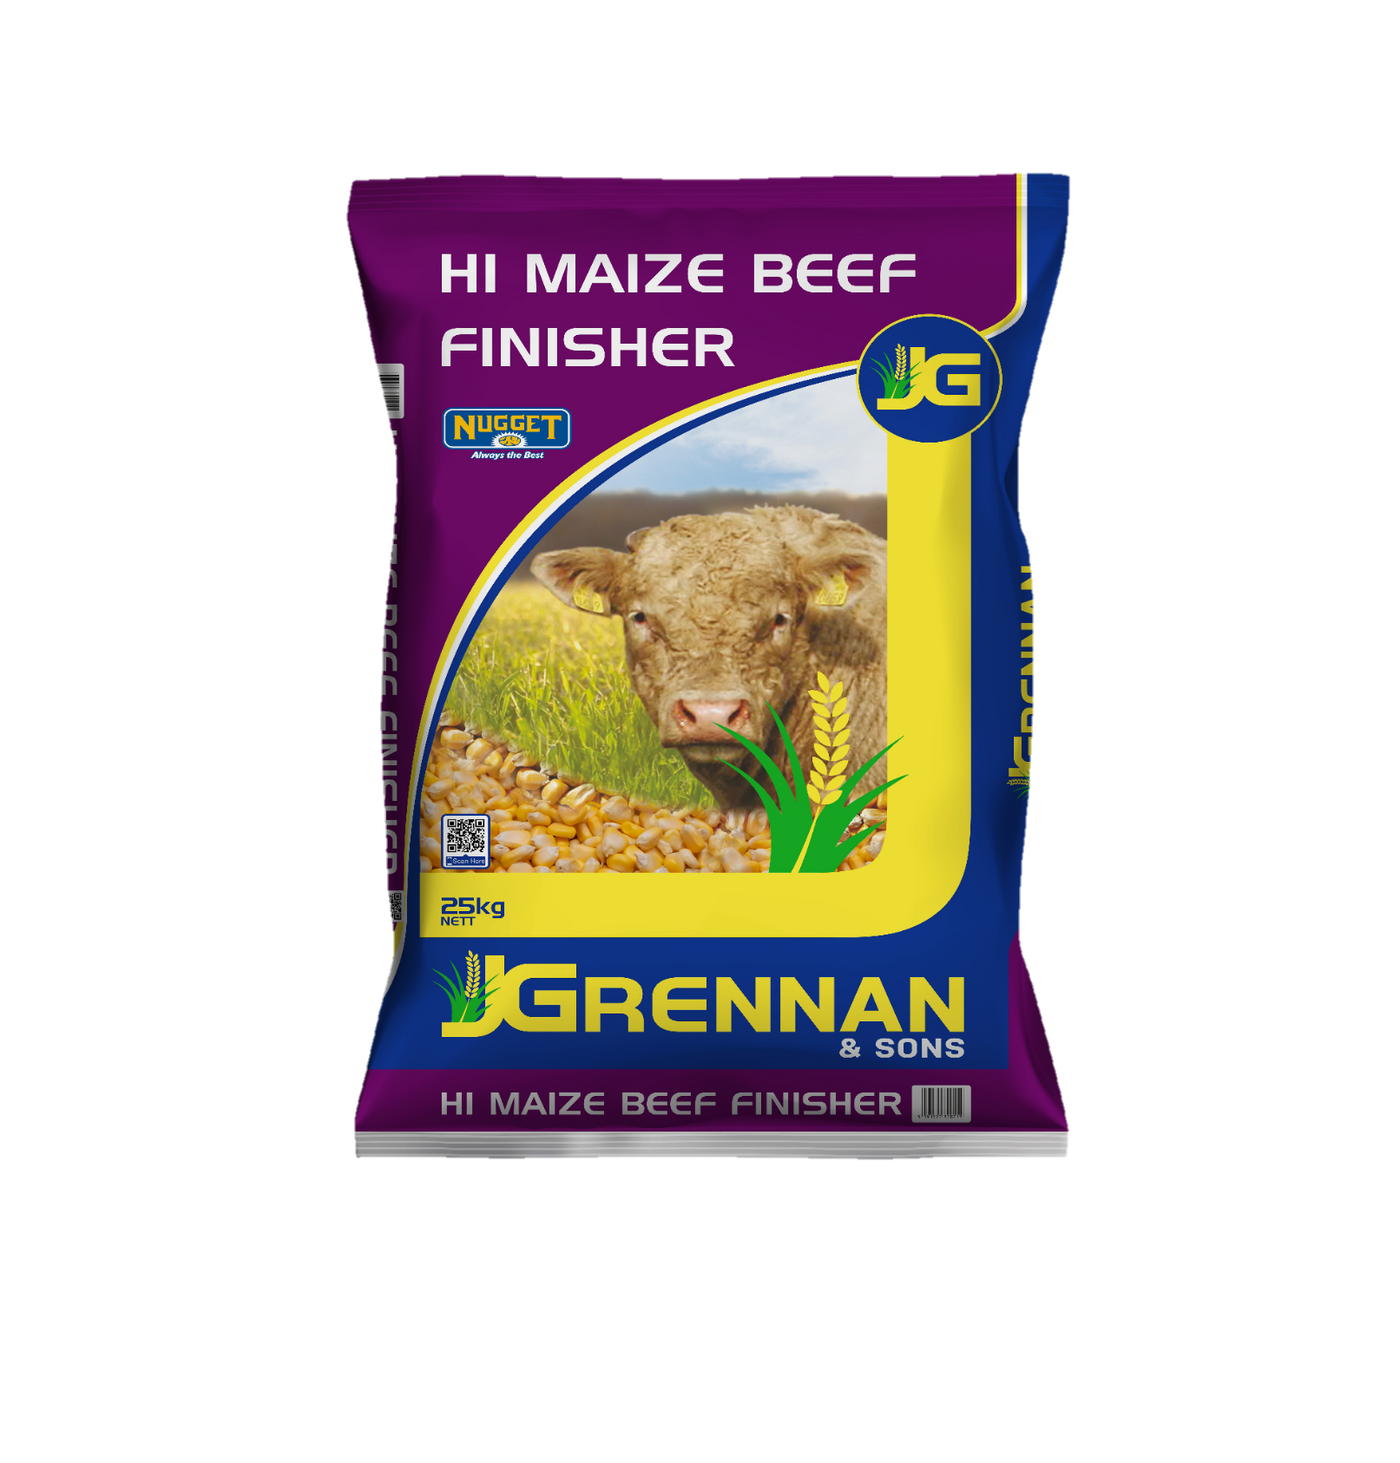 High Maize Beef Finisher